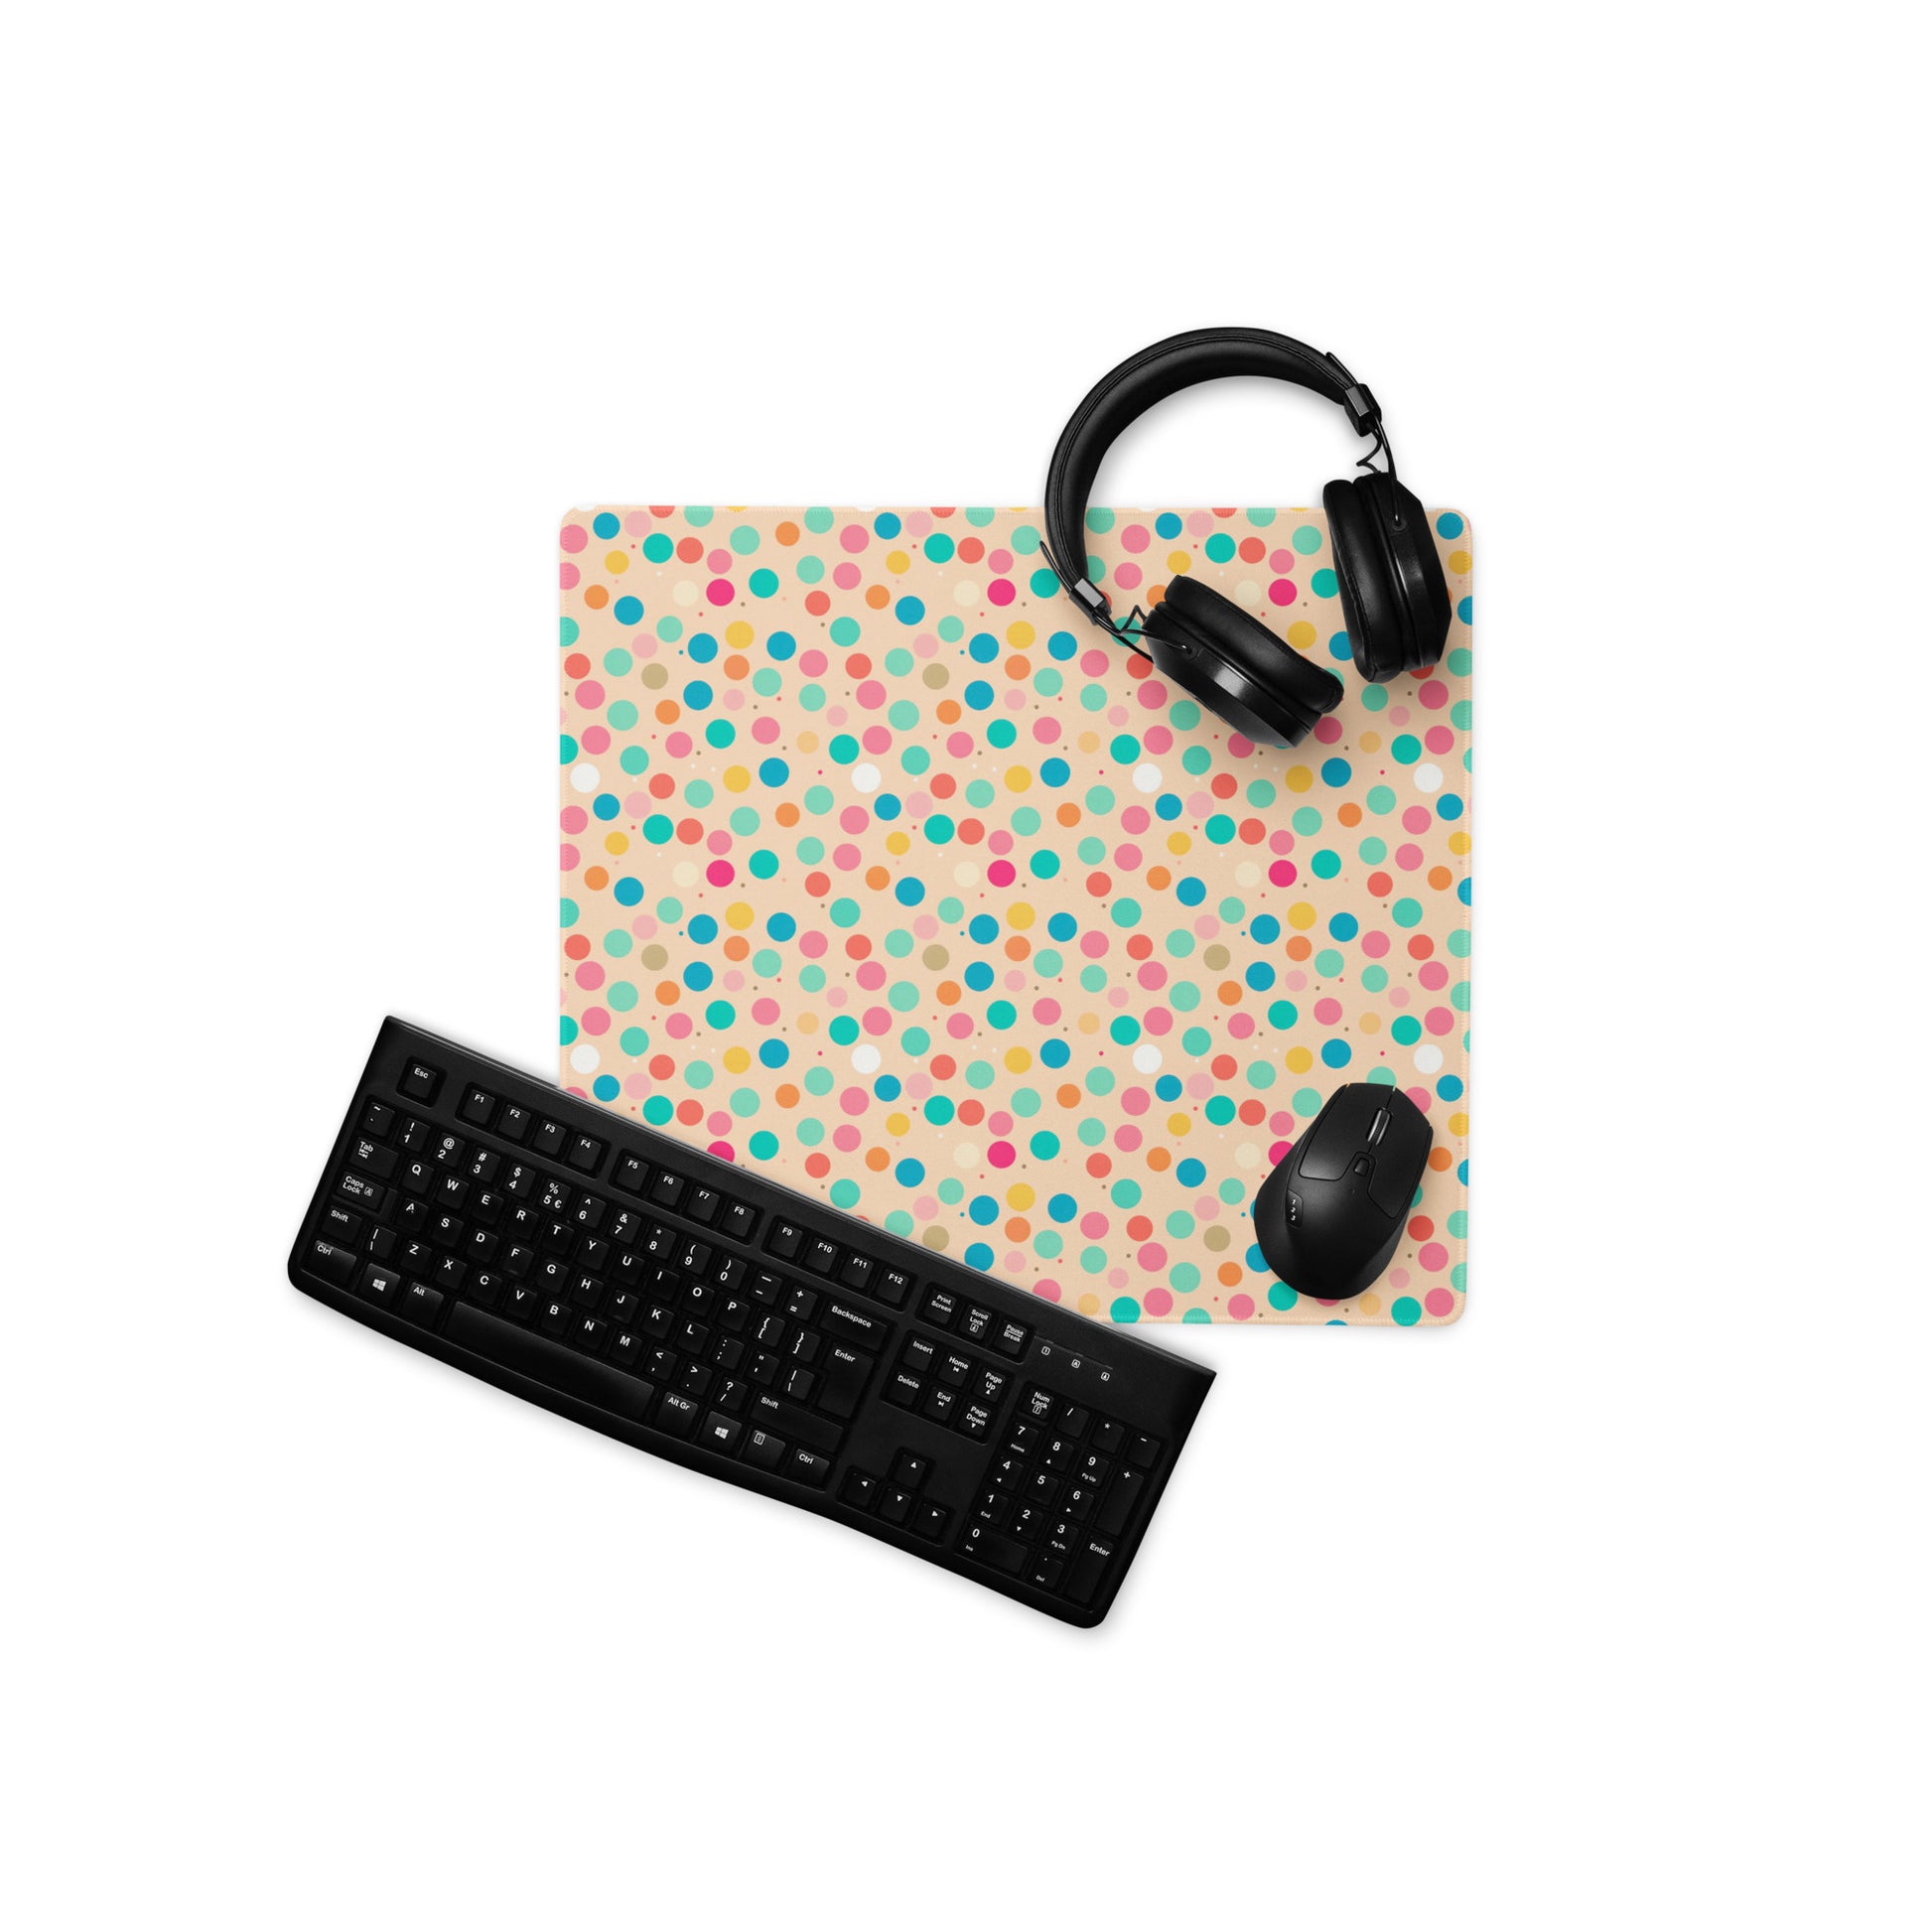 A 18" x 16" desk pad with a colorful polka dot pattern. With a keyboard, mouse, and headphones sitting on it.